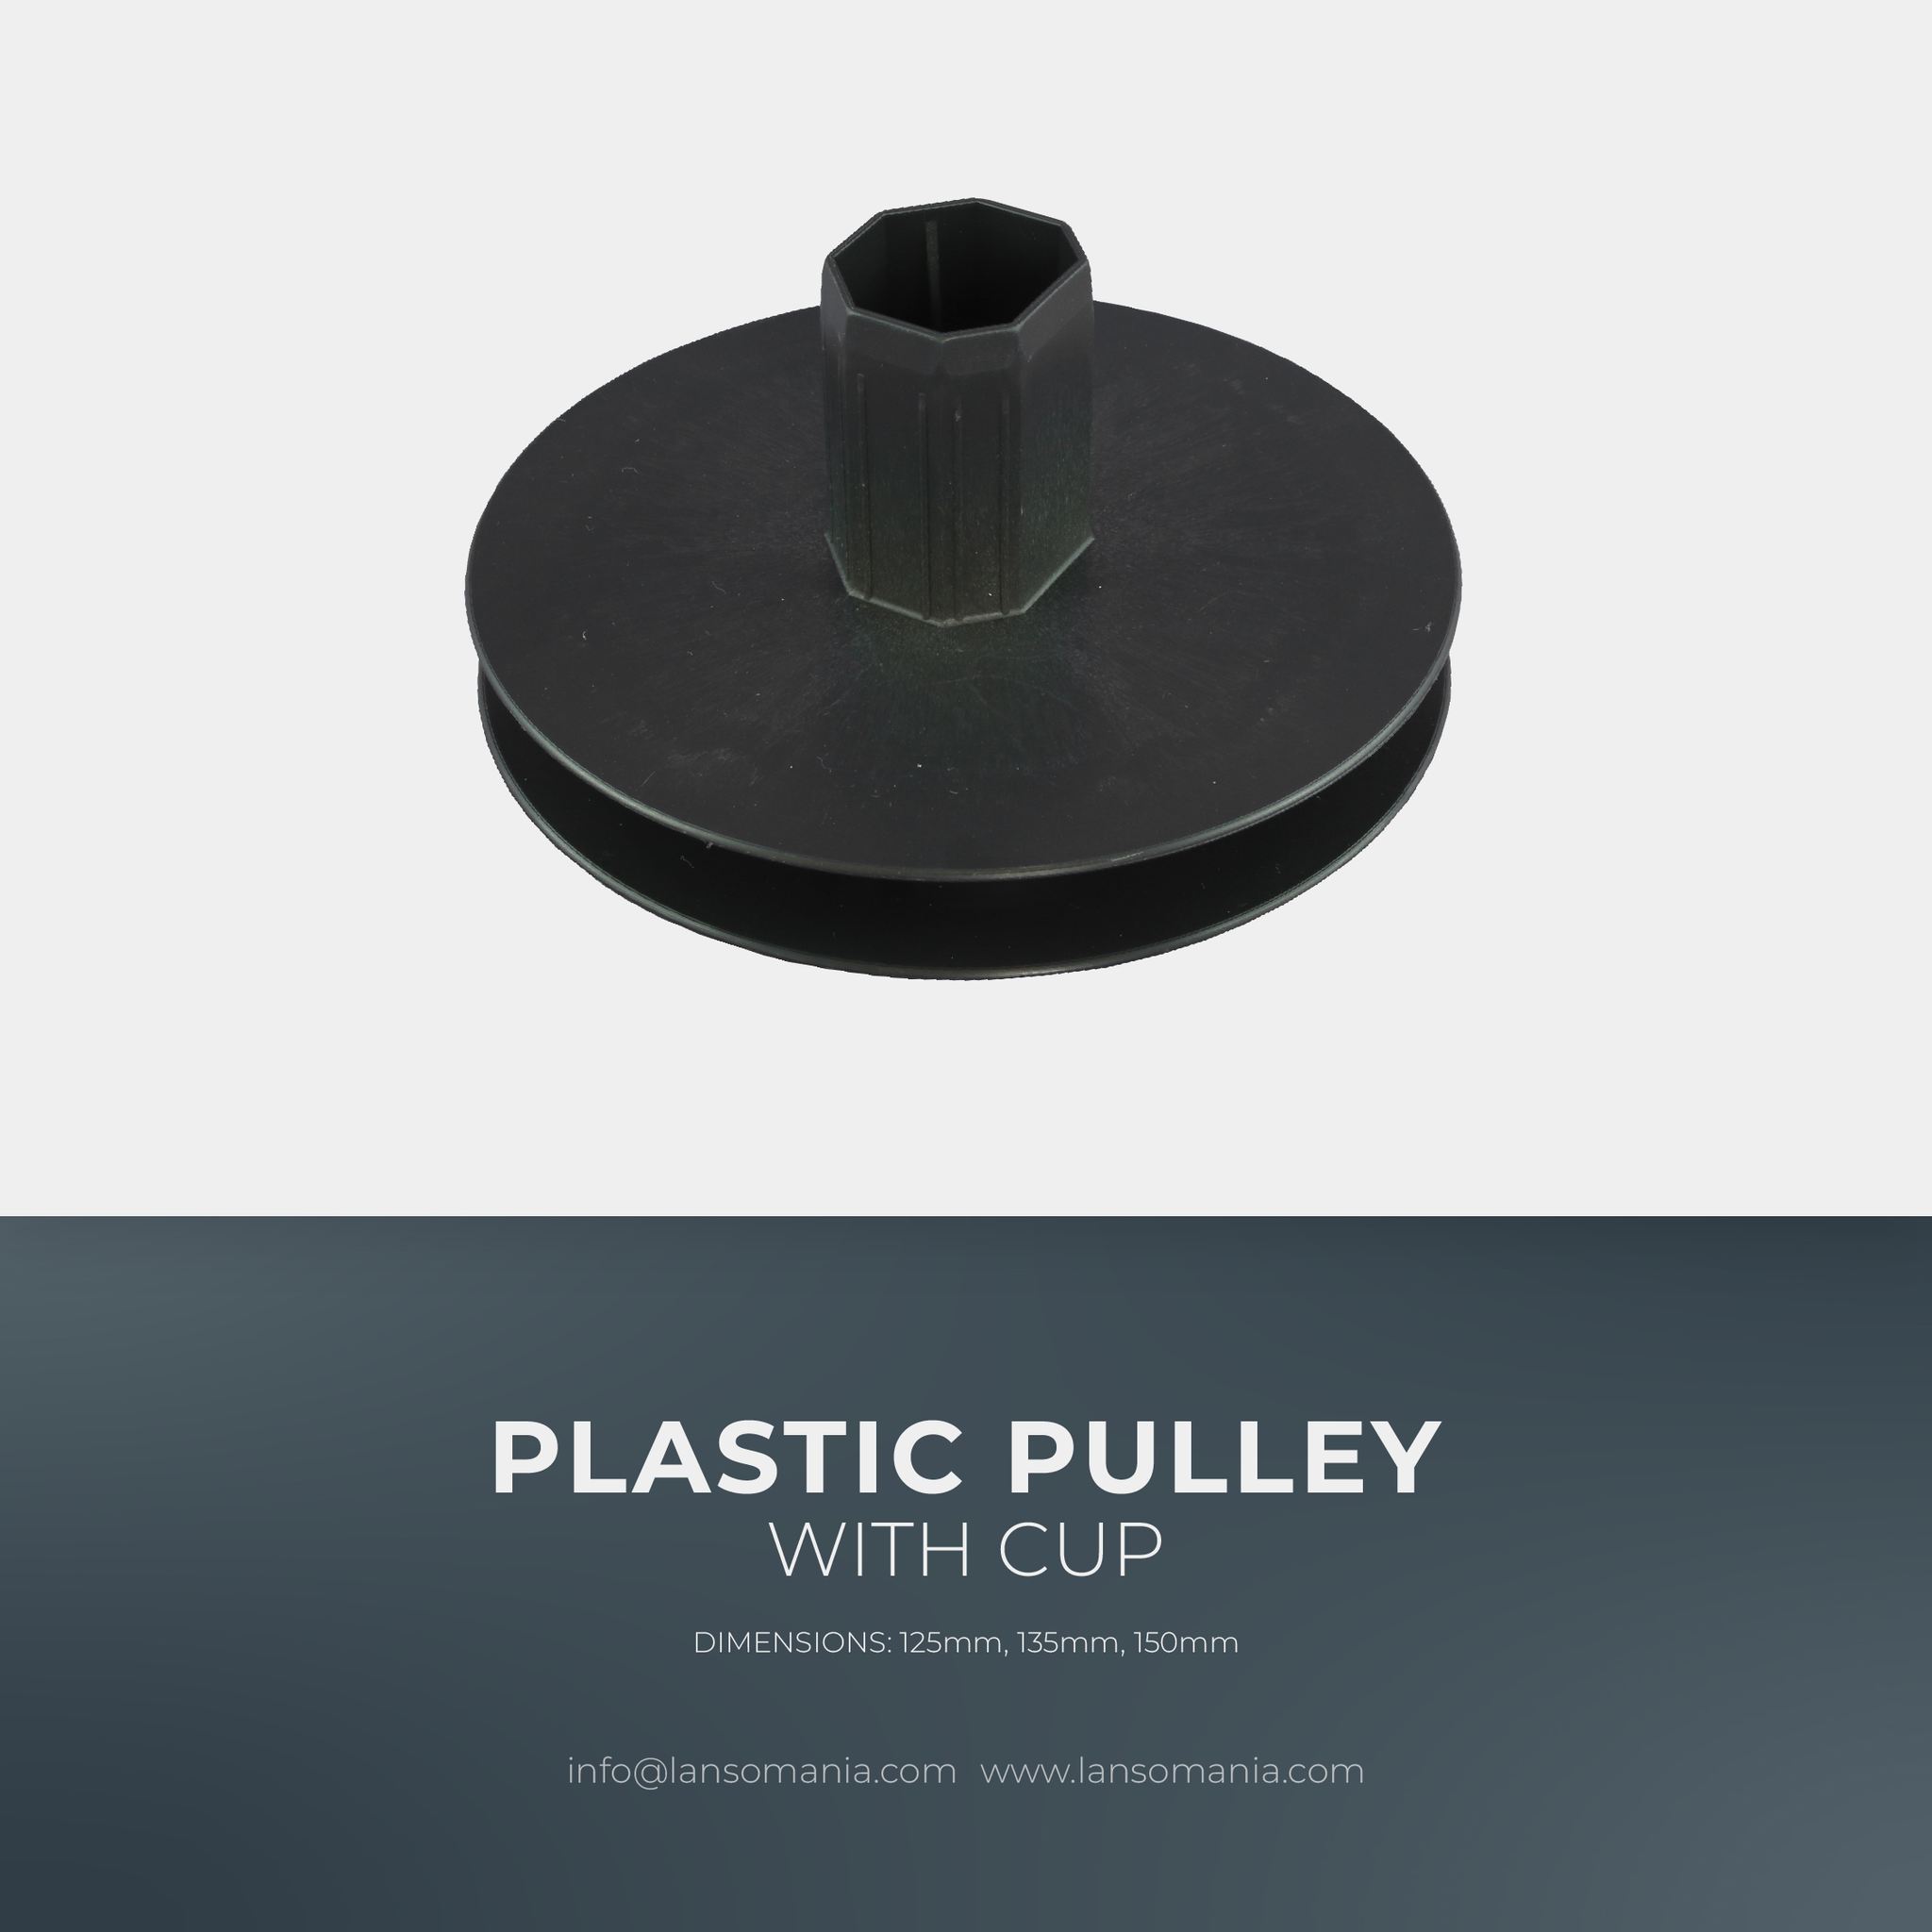 PLASTIC PULLEY WITH CUP